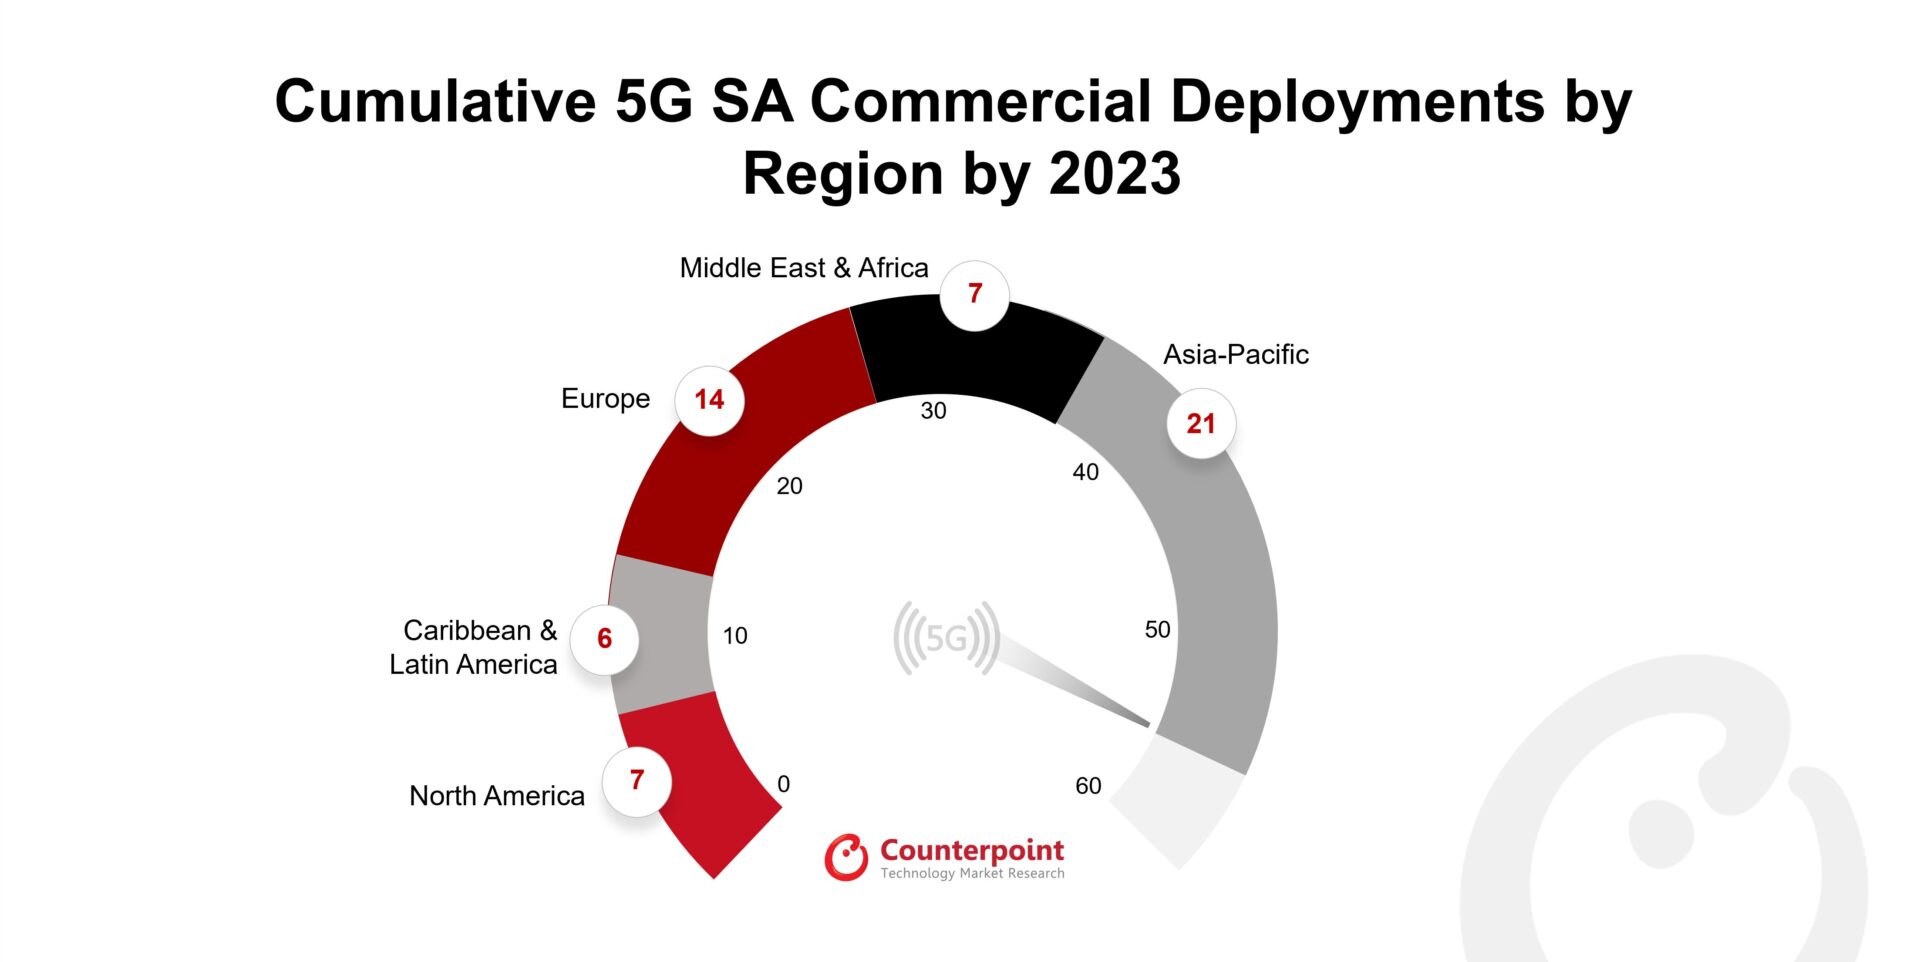 Operator Transitions to 5G SA Core Decline YoY in 2023